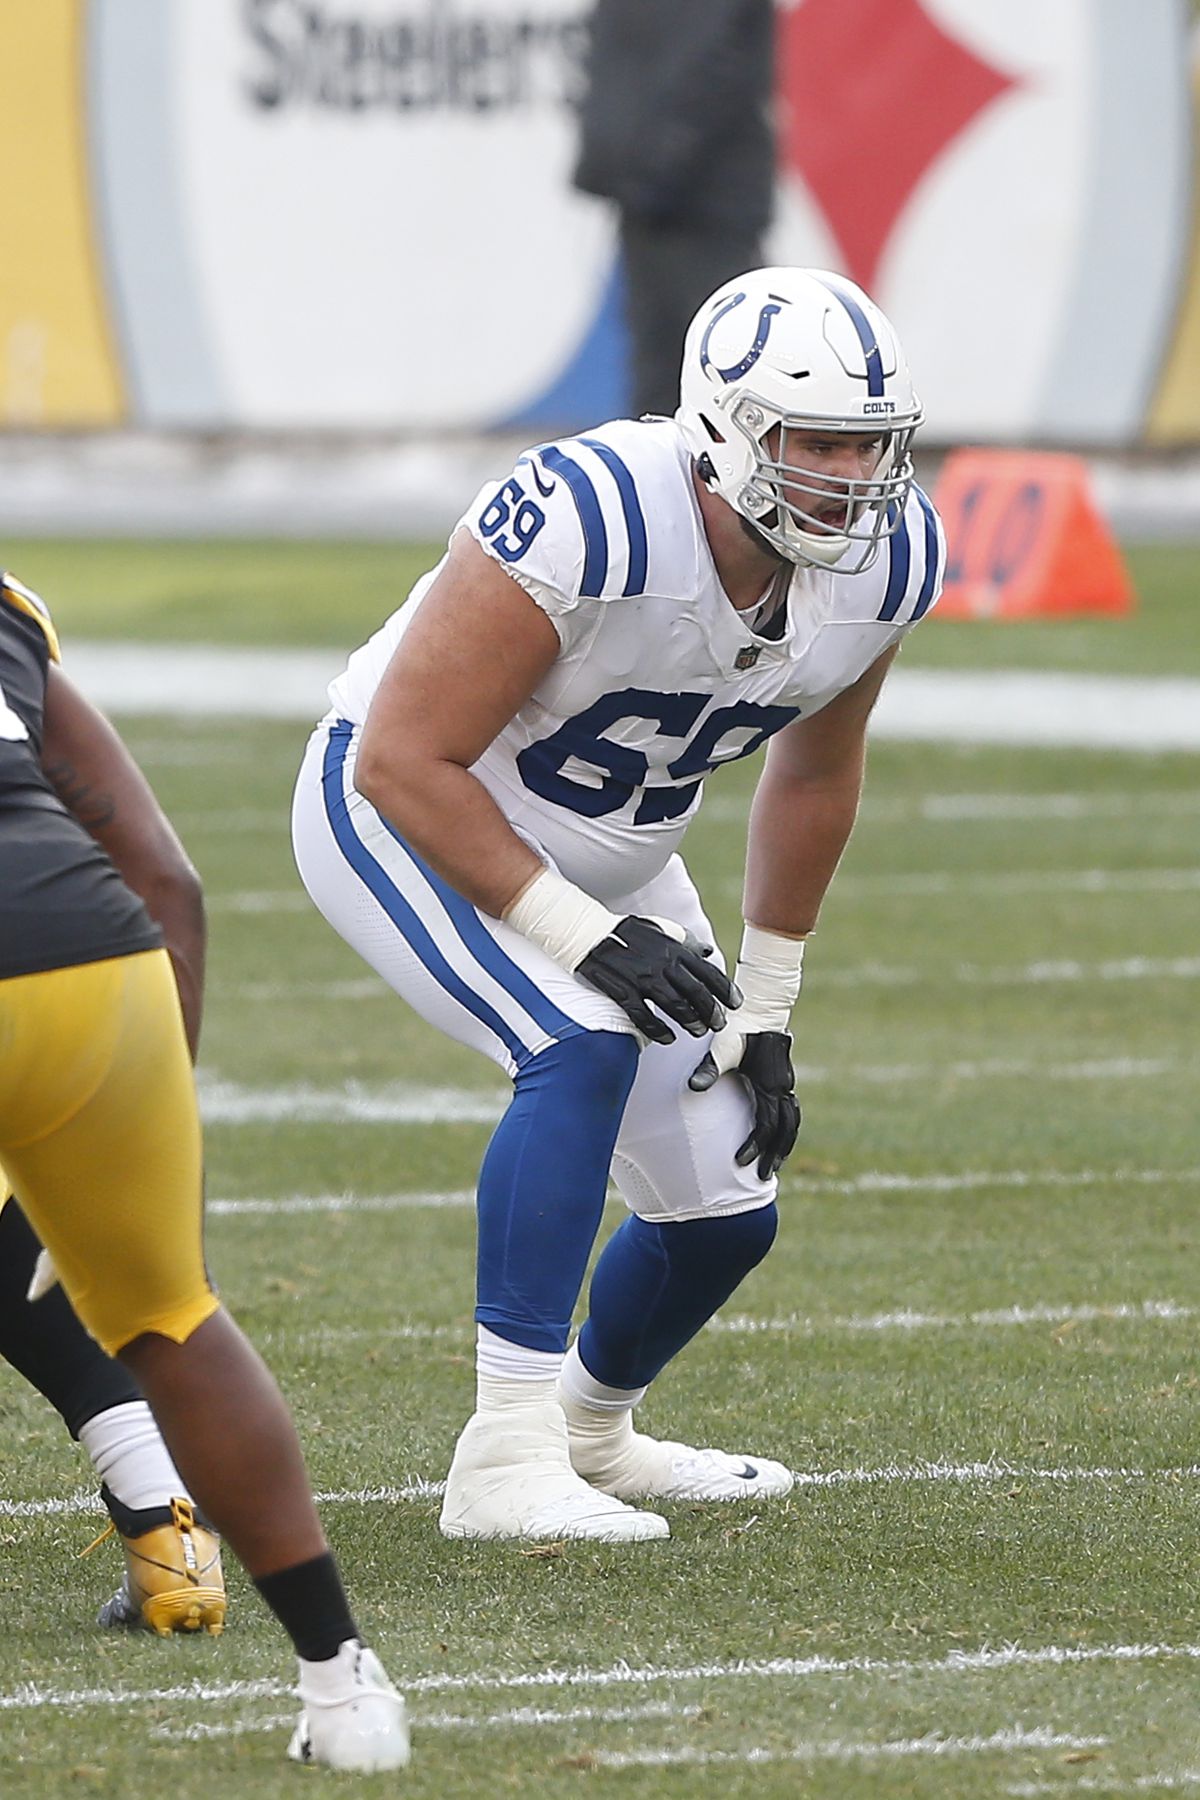 NFL: DEC 27 Colts at Steelers